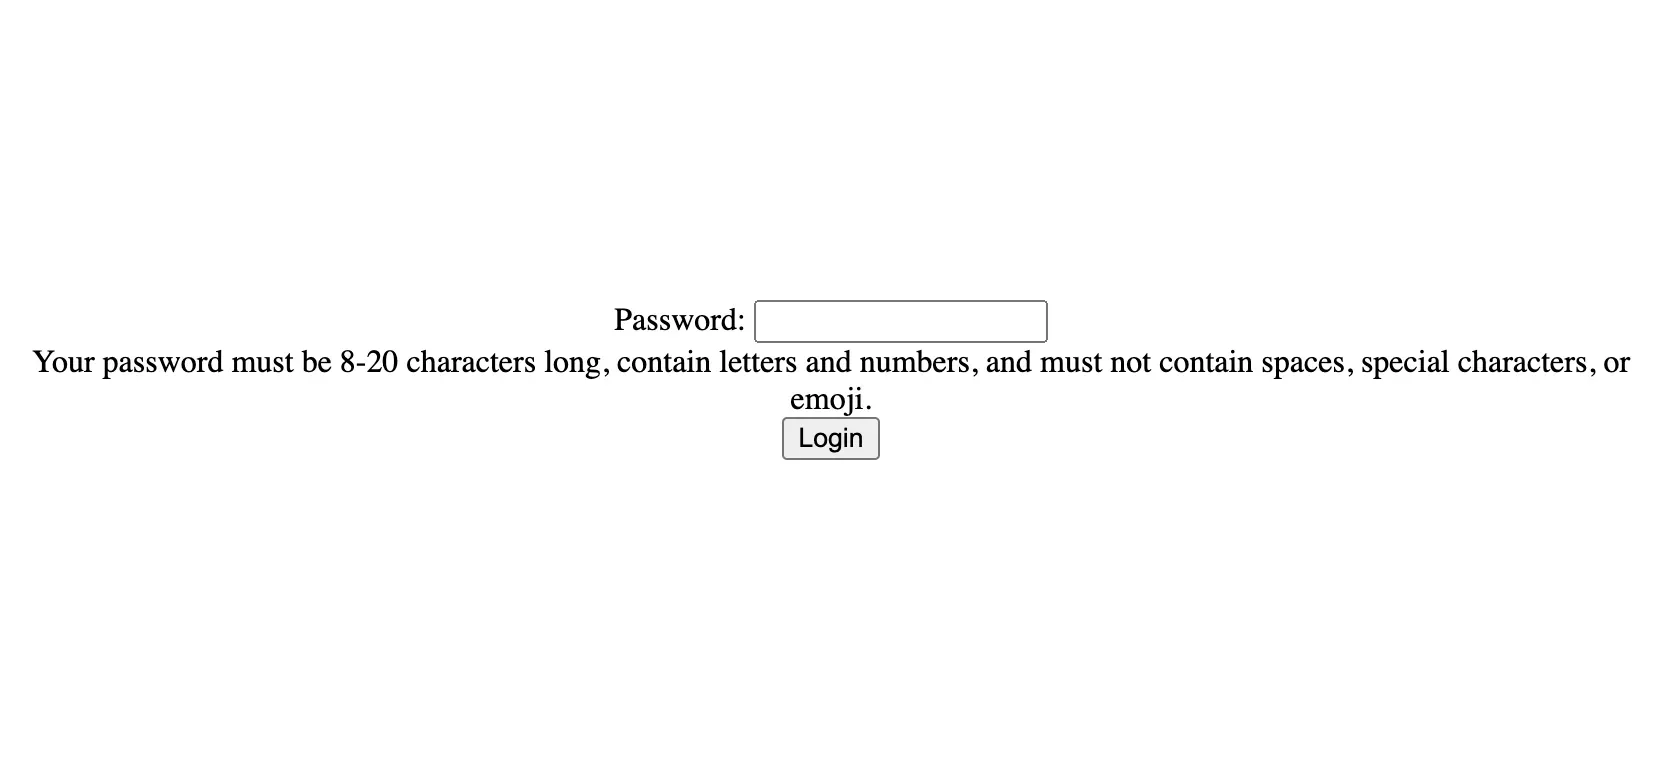 Providing Instructions for Password Format Requirements